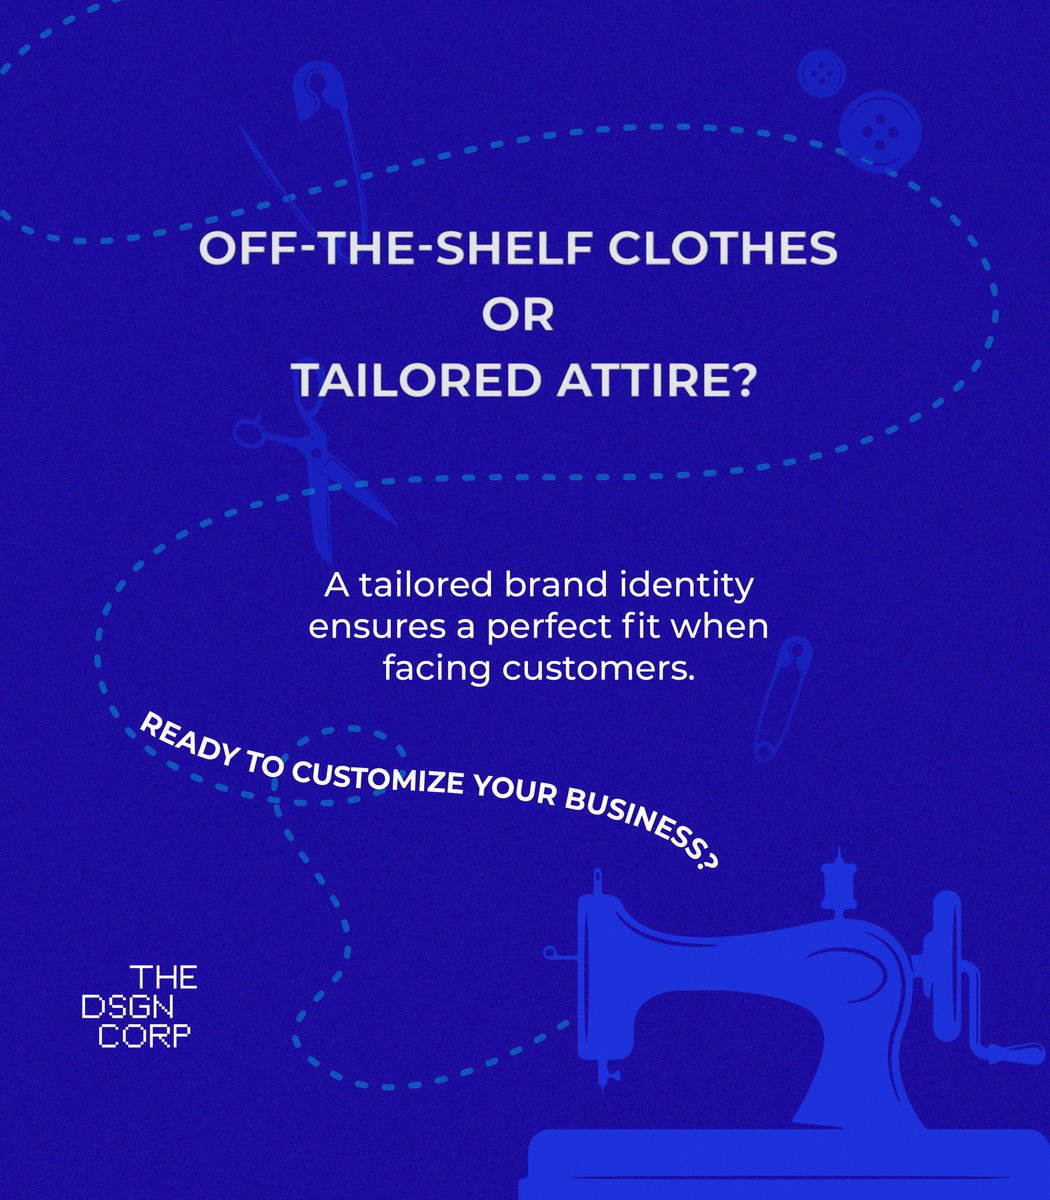 👔🌟 Just like tailored clothes, a customized business identity fits perfectly when engaging customers. Off-the-shelf won't cut it! Elevate your brand presence with a personalized identity. Let's create a tailored brand for your success! #TailoredBranding #BusinessIdentity